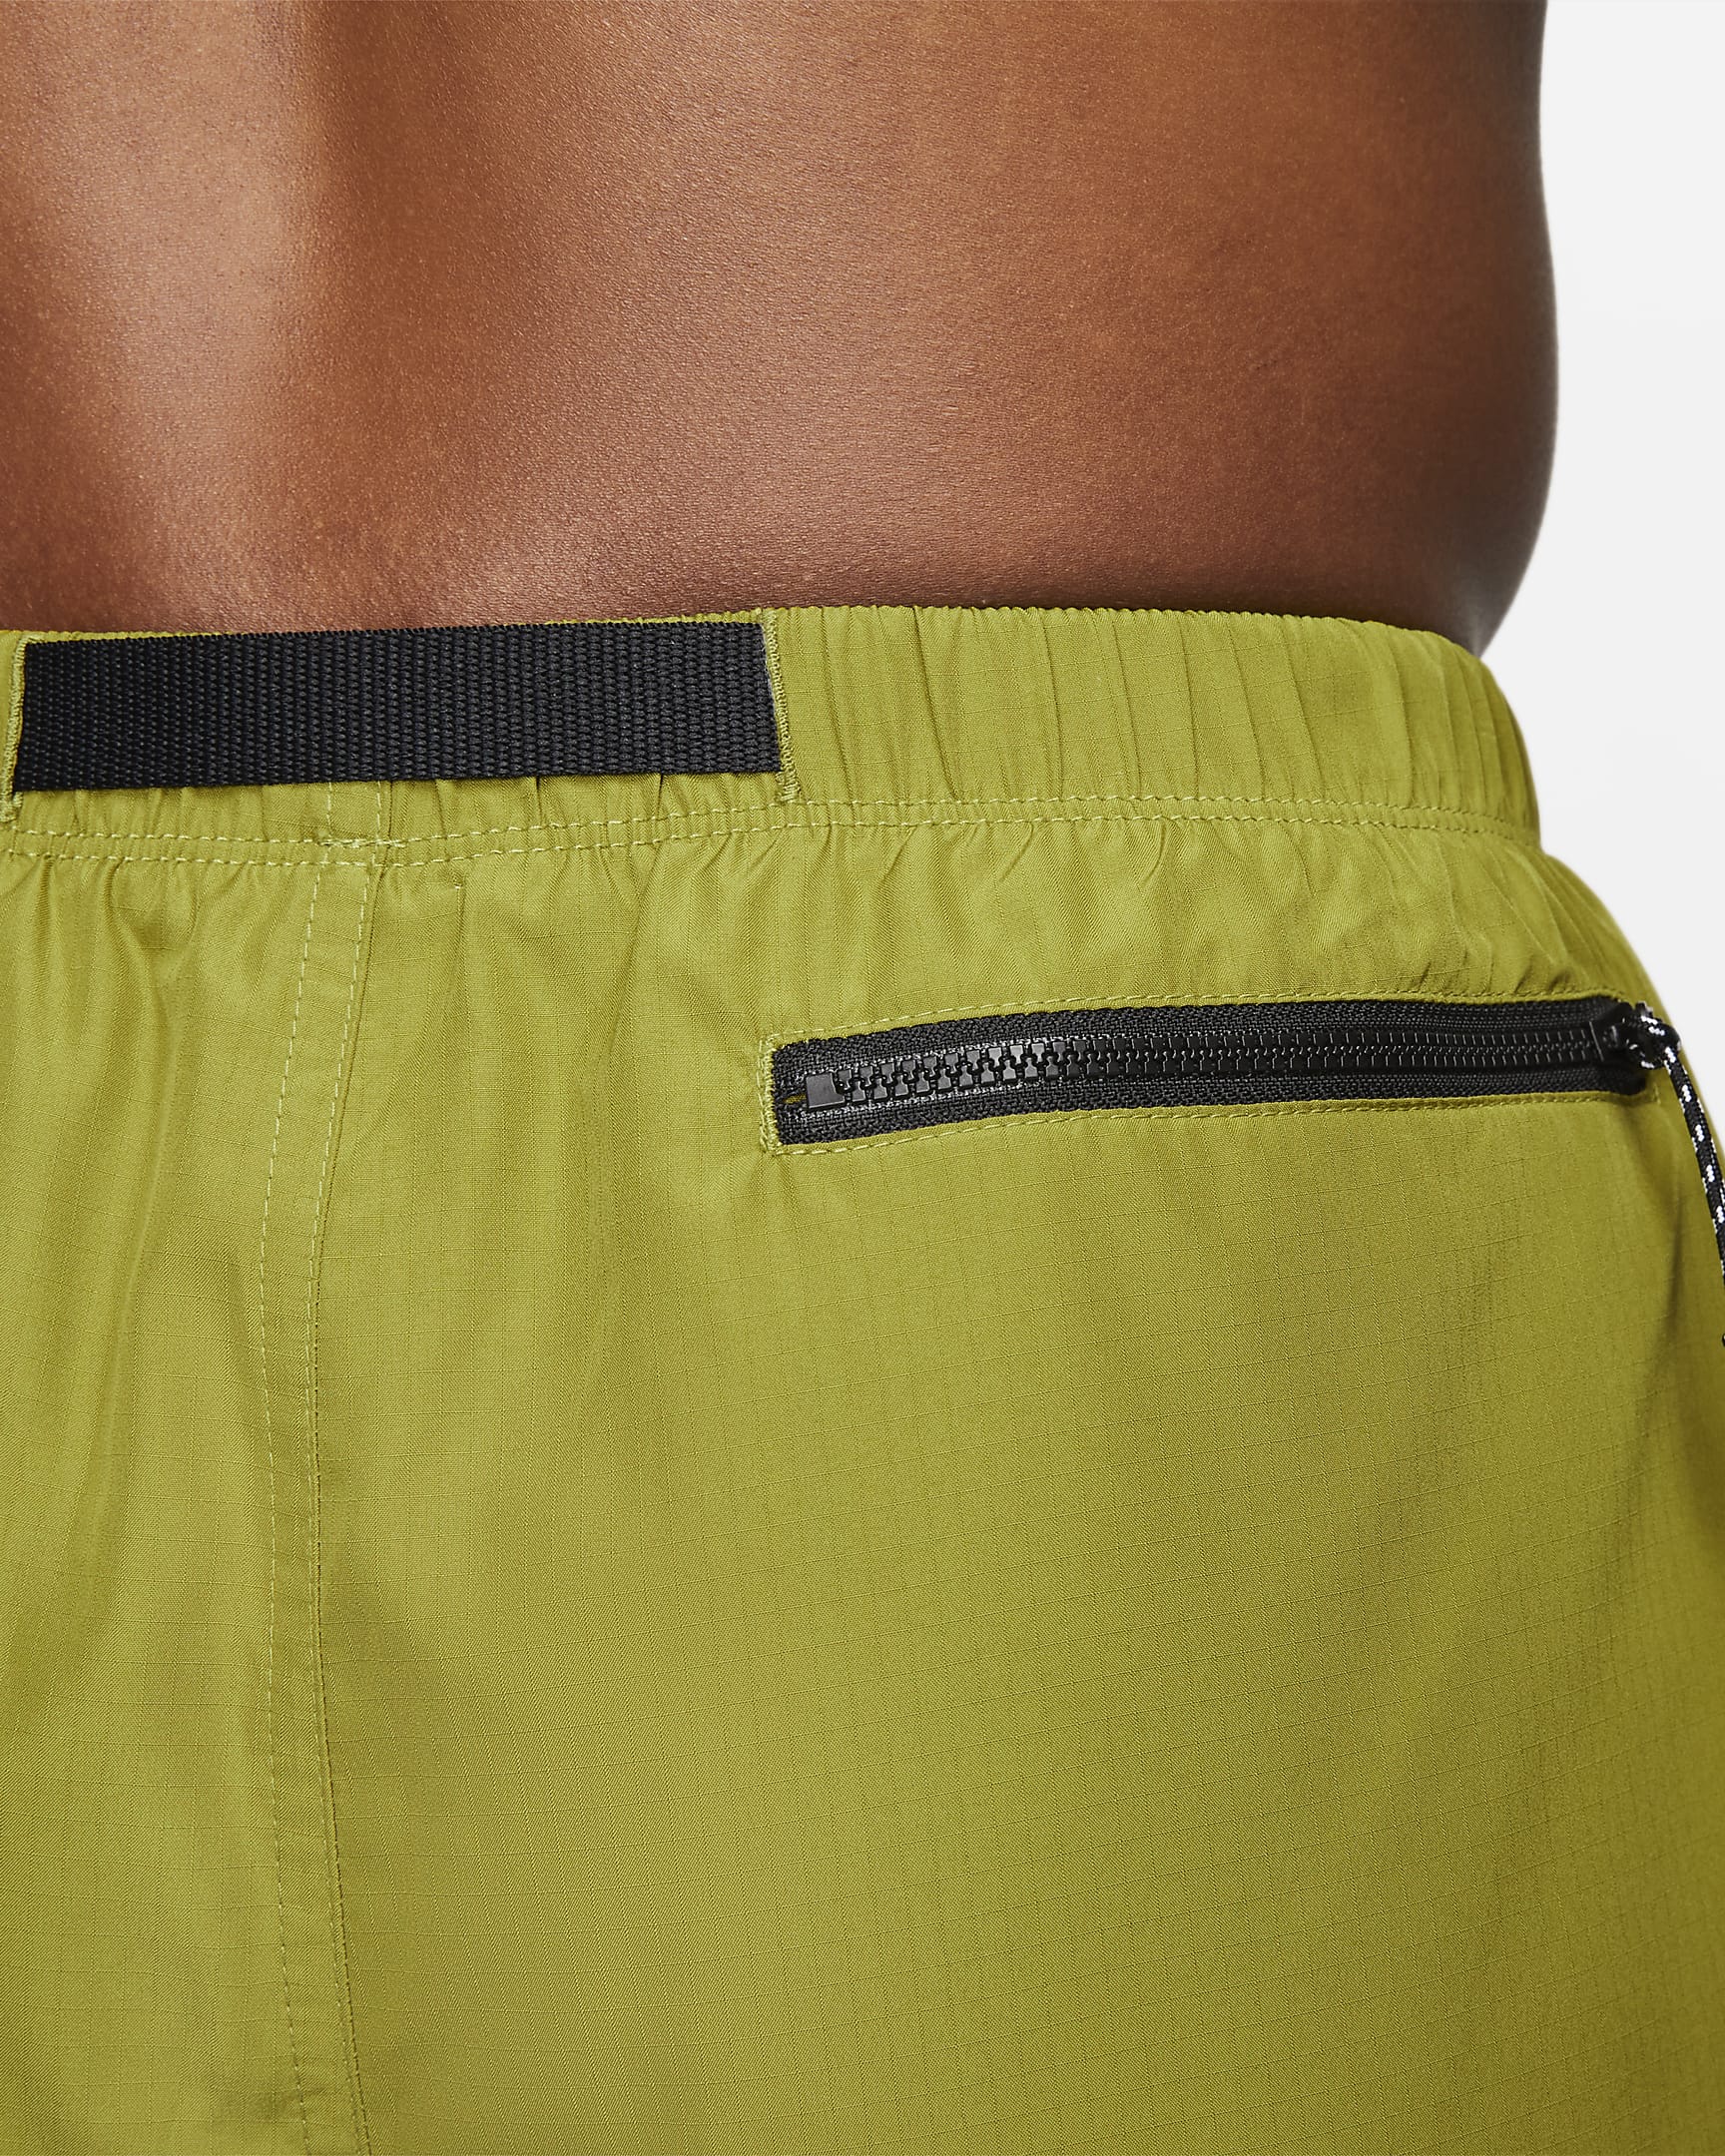 Nike Men's 13cm (approx.) Belted Packable Swimming Trunks. Nike SE